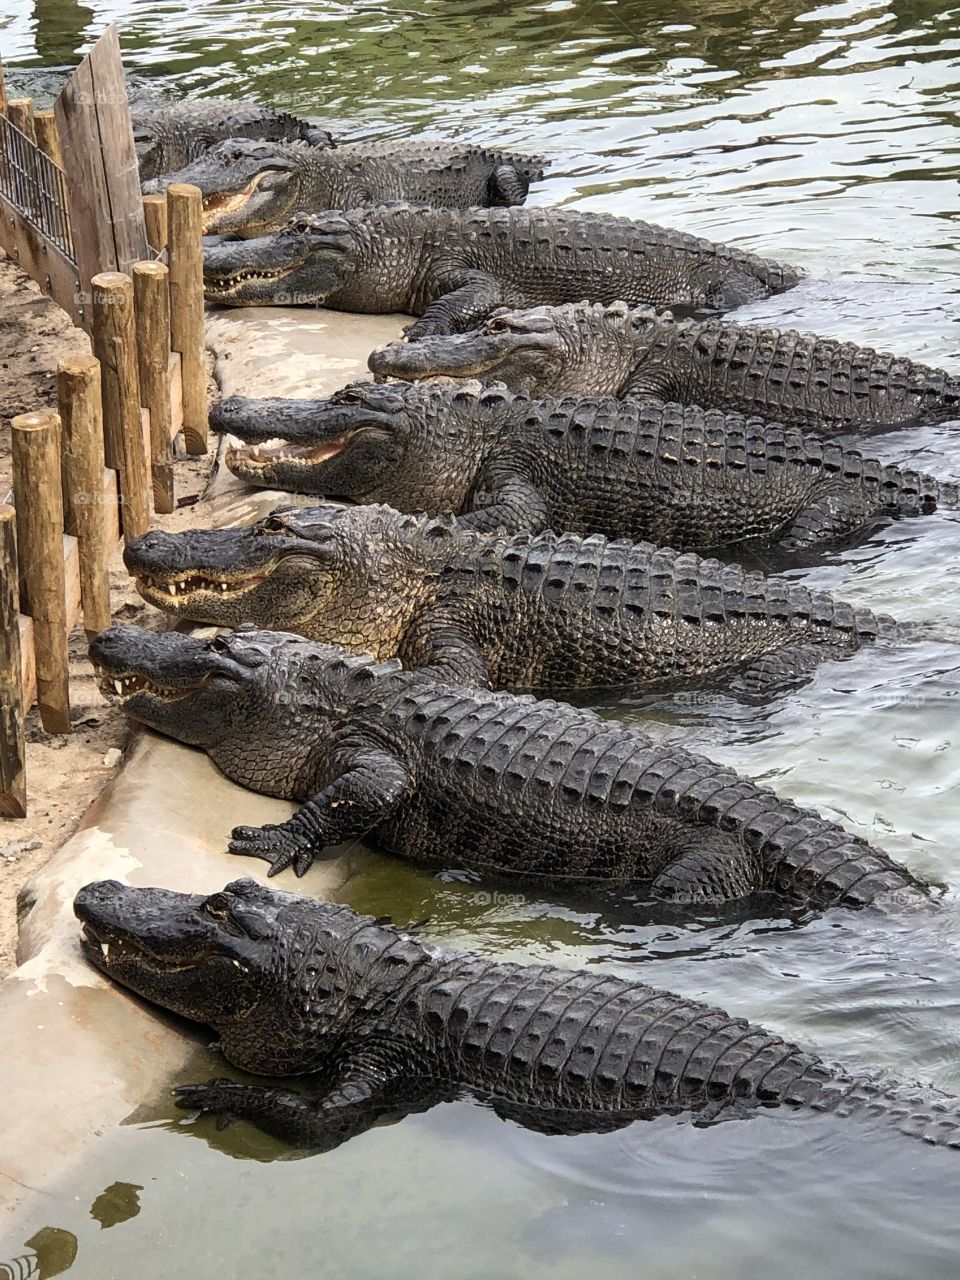 A group of alligators lined up in the water